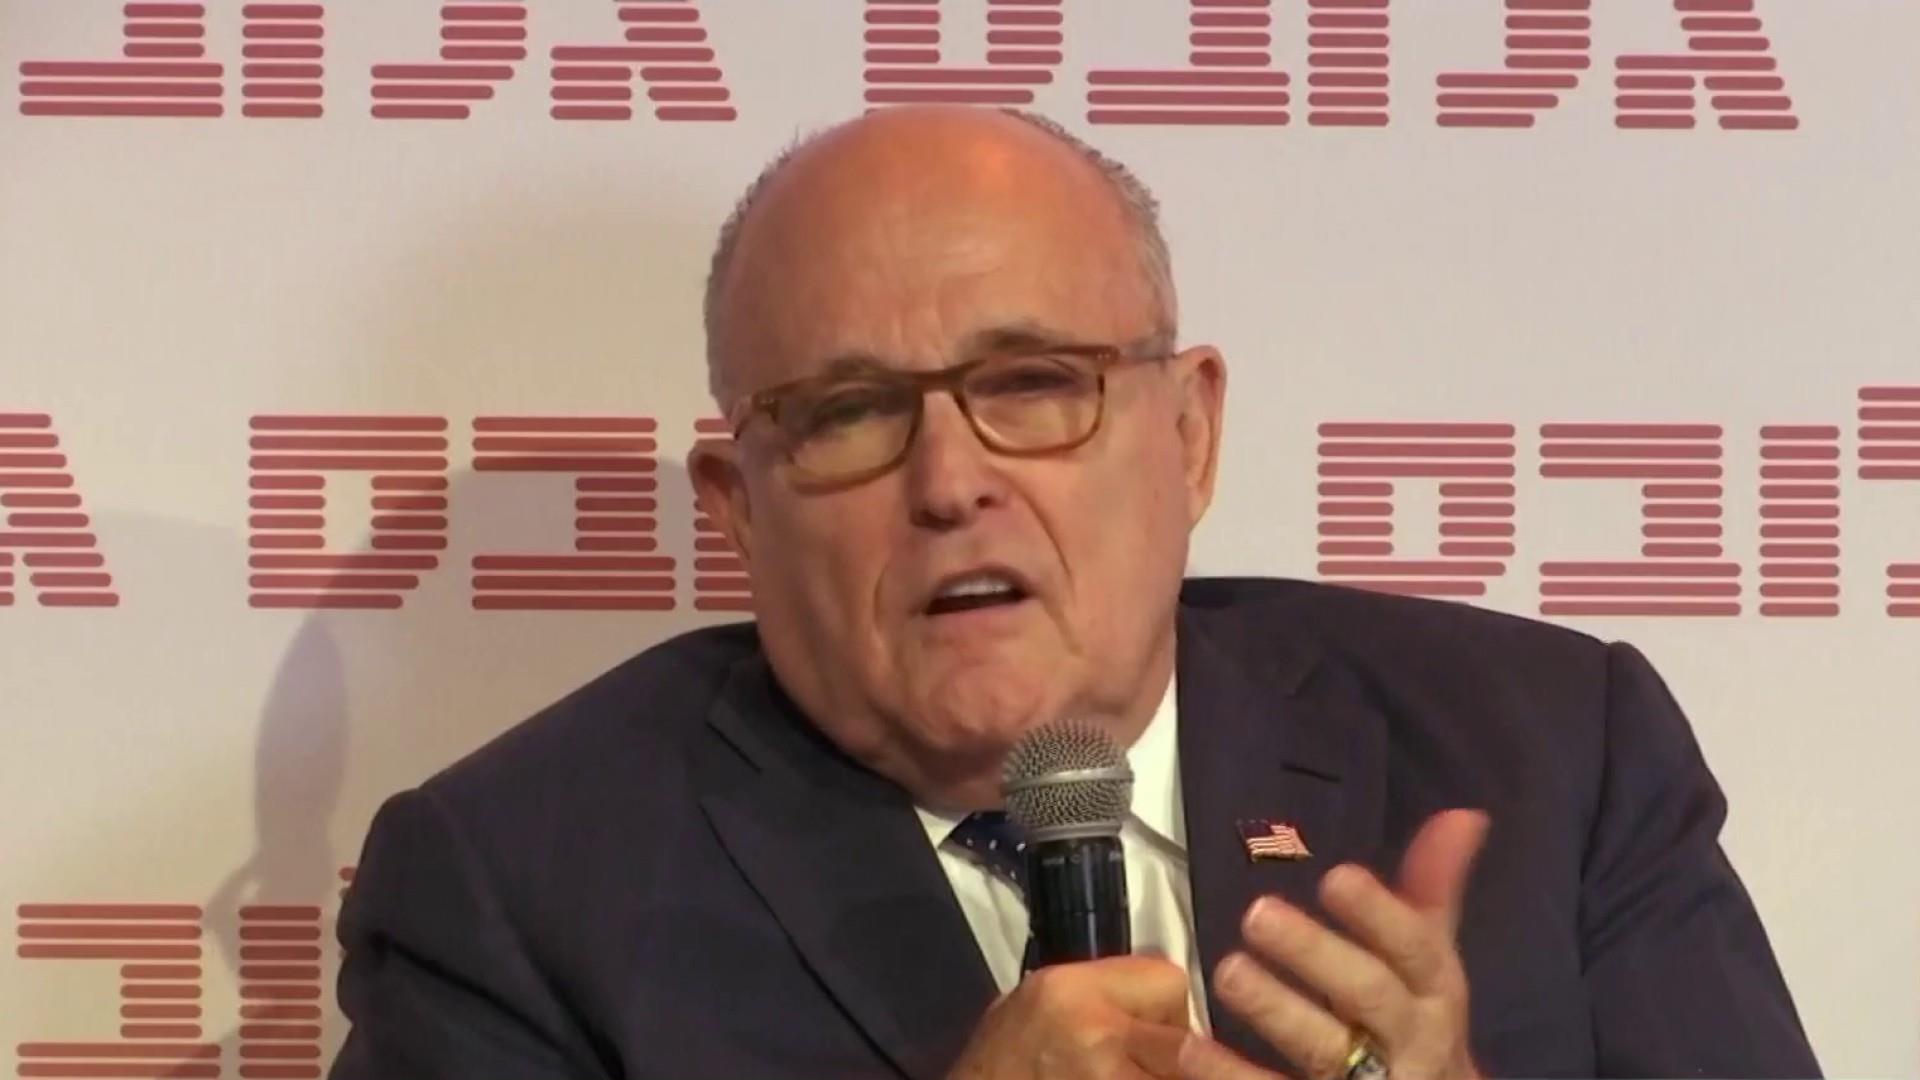 Giuliani: I don't respect Stormy Daniels as a woman because she's a ...